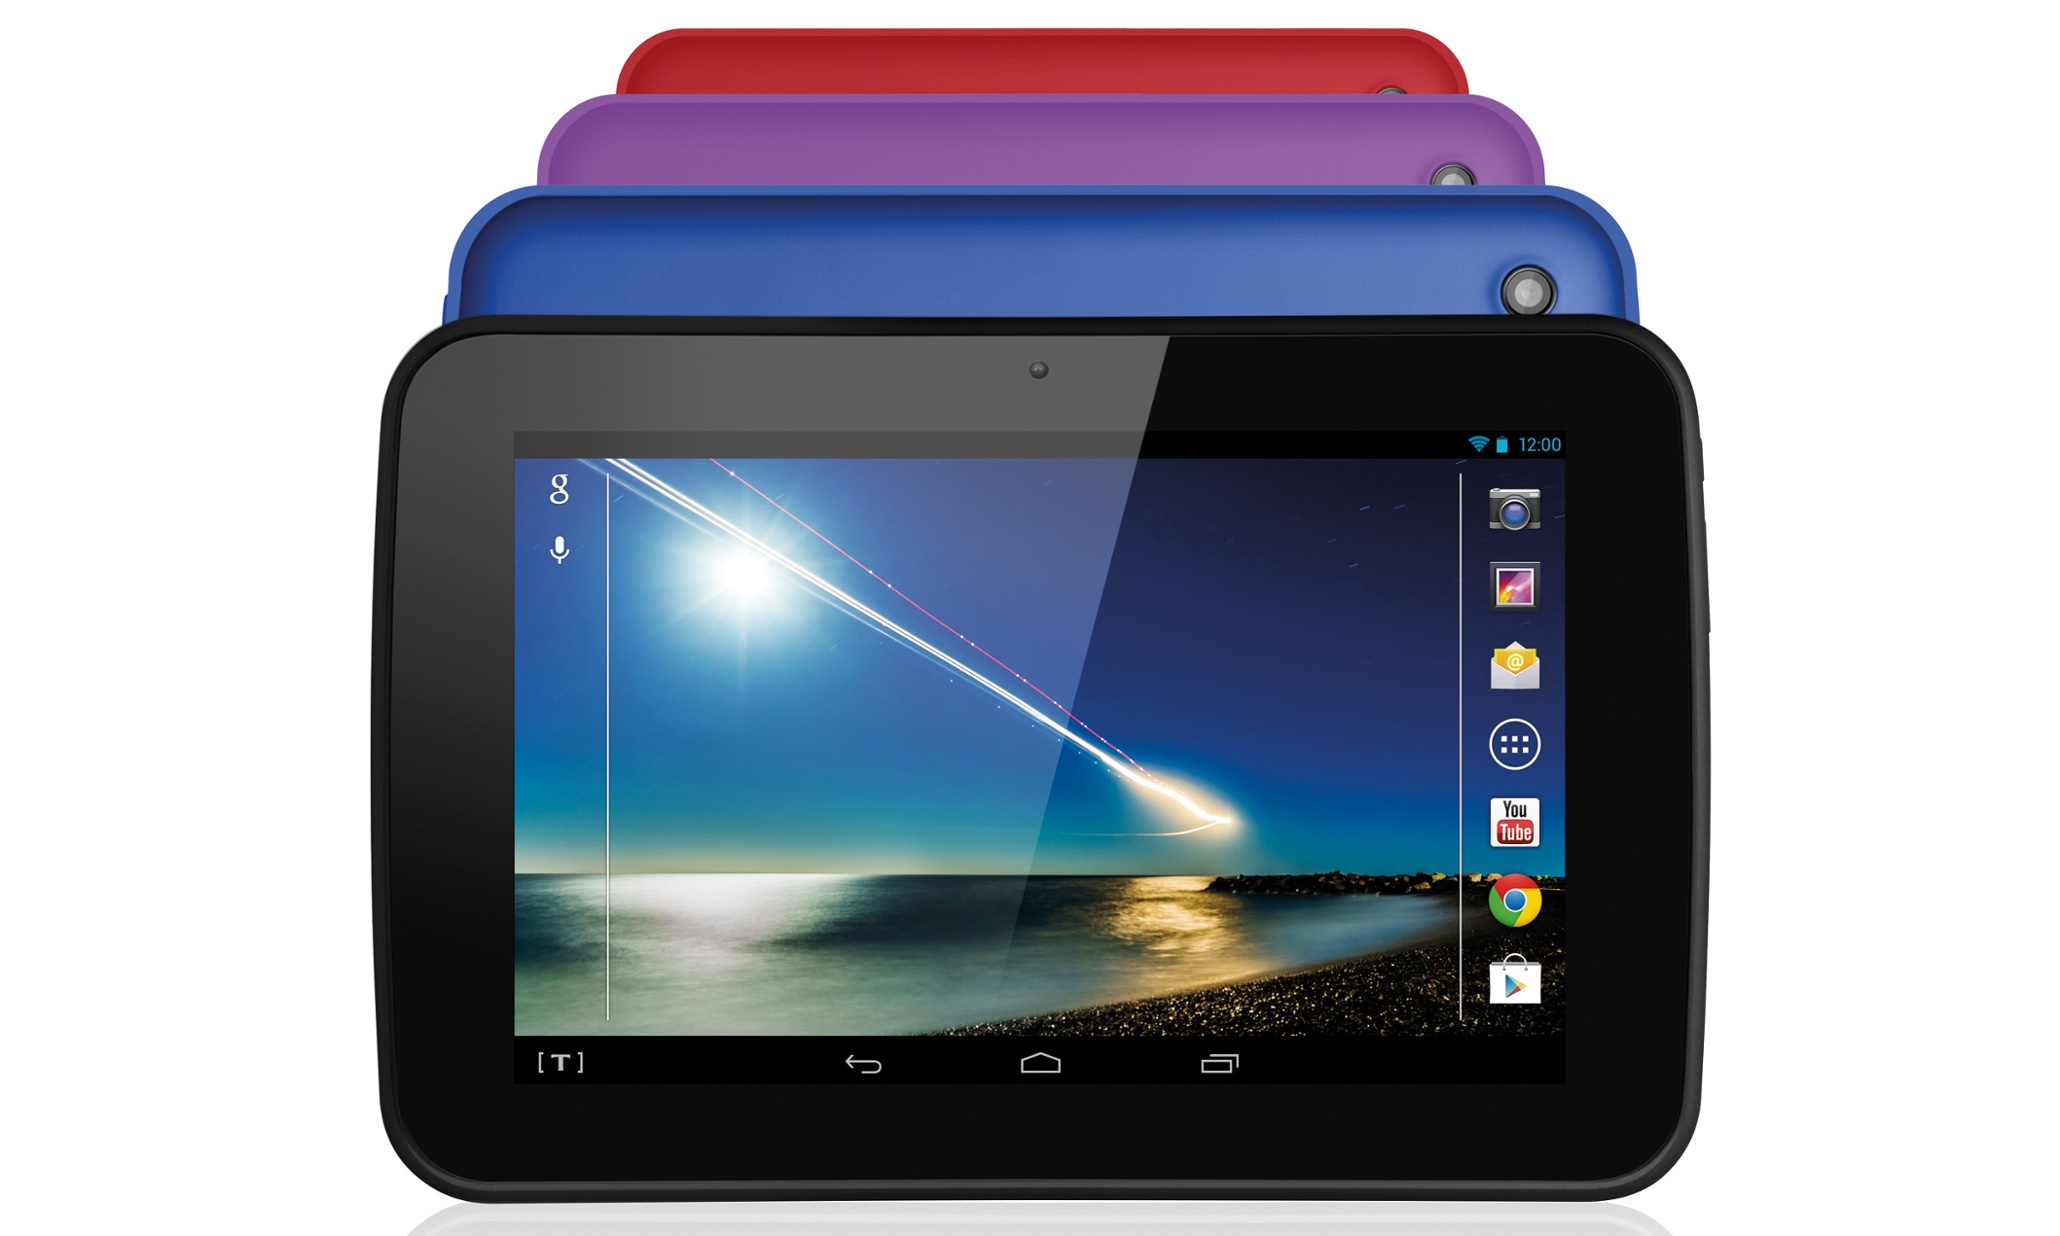 xpad android tablet